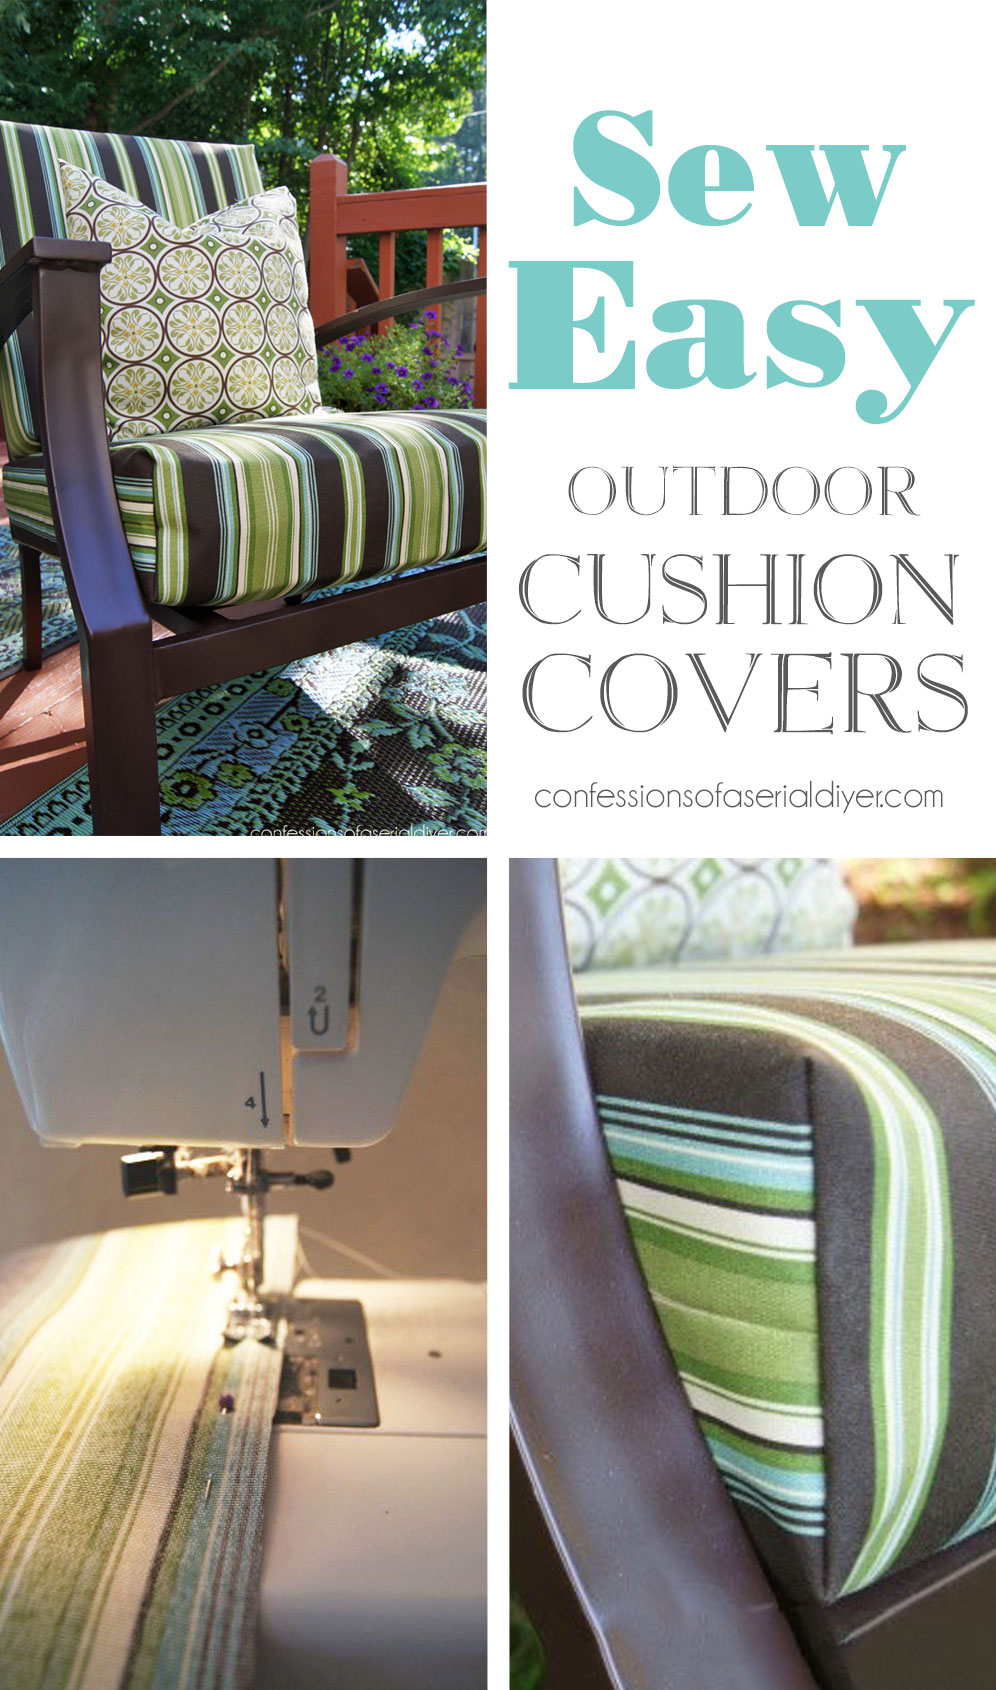 Sew Easy Outdoor Cushion Covers, How To Clean Removable Outdoor Cushion Covers